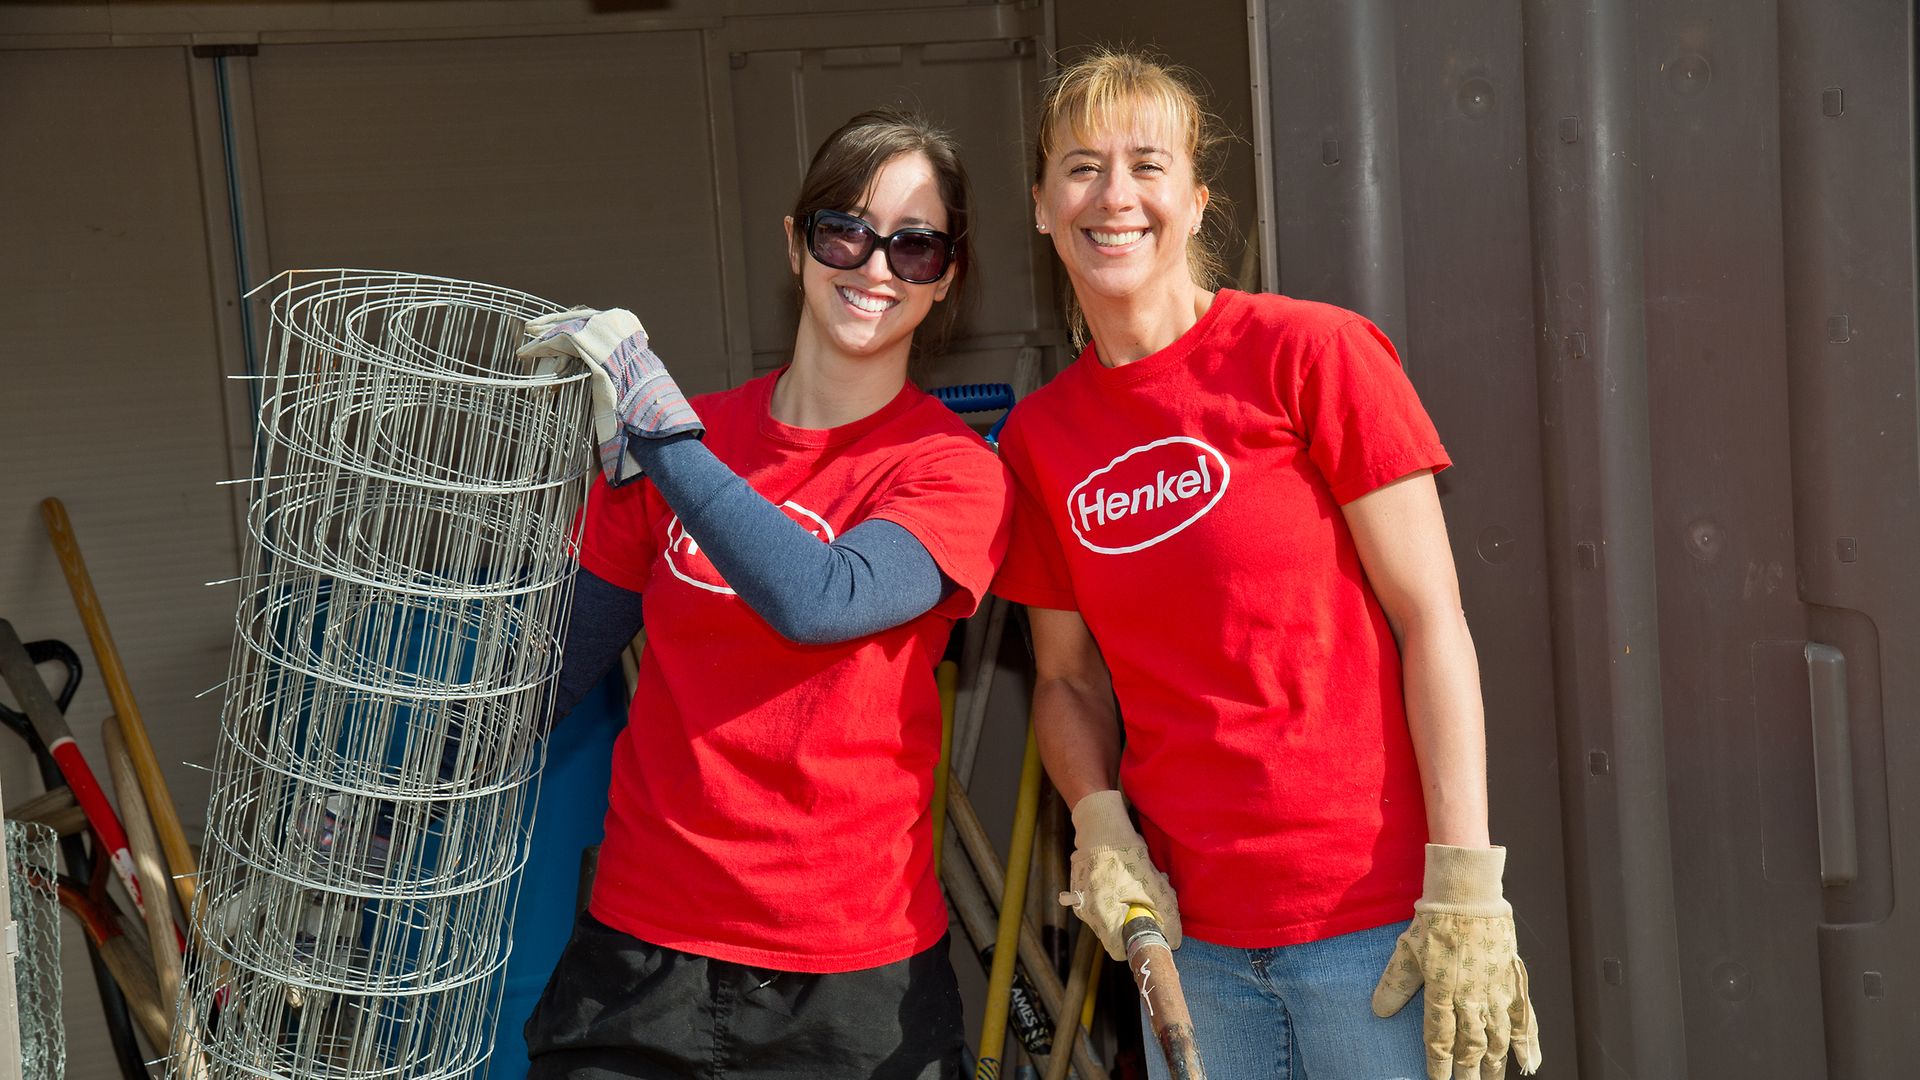 Henkel continues the tradition by reserving a day during the holidays for community service.